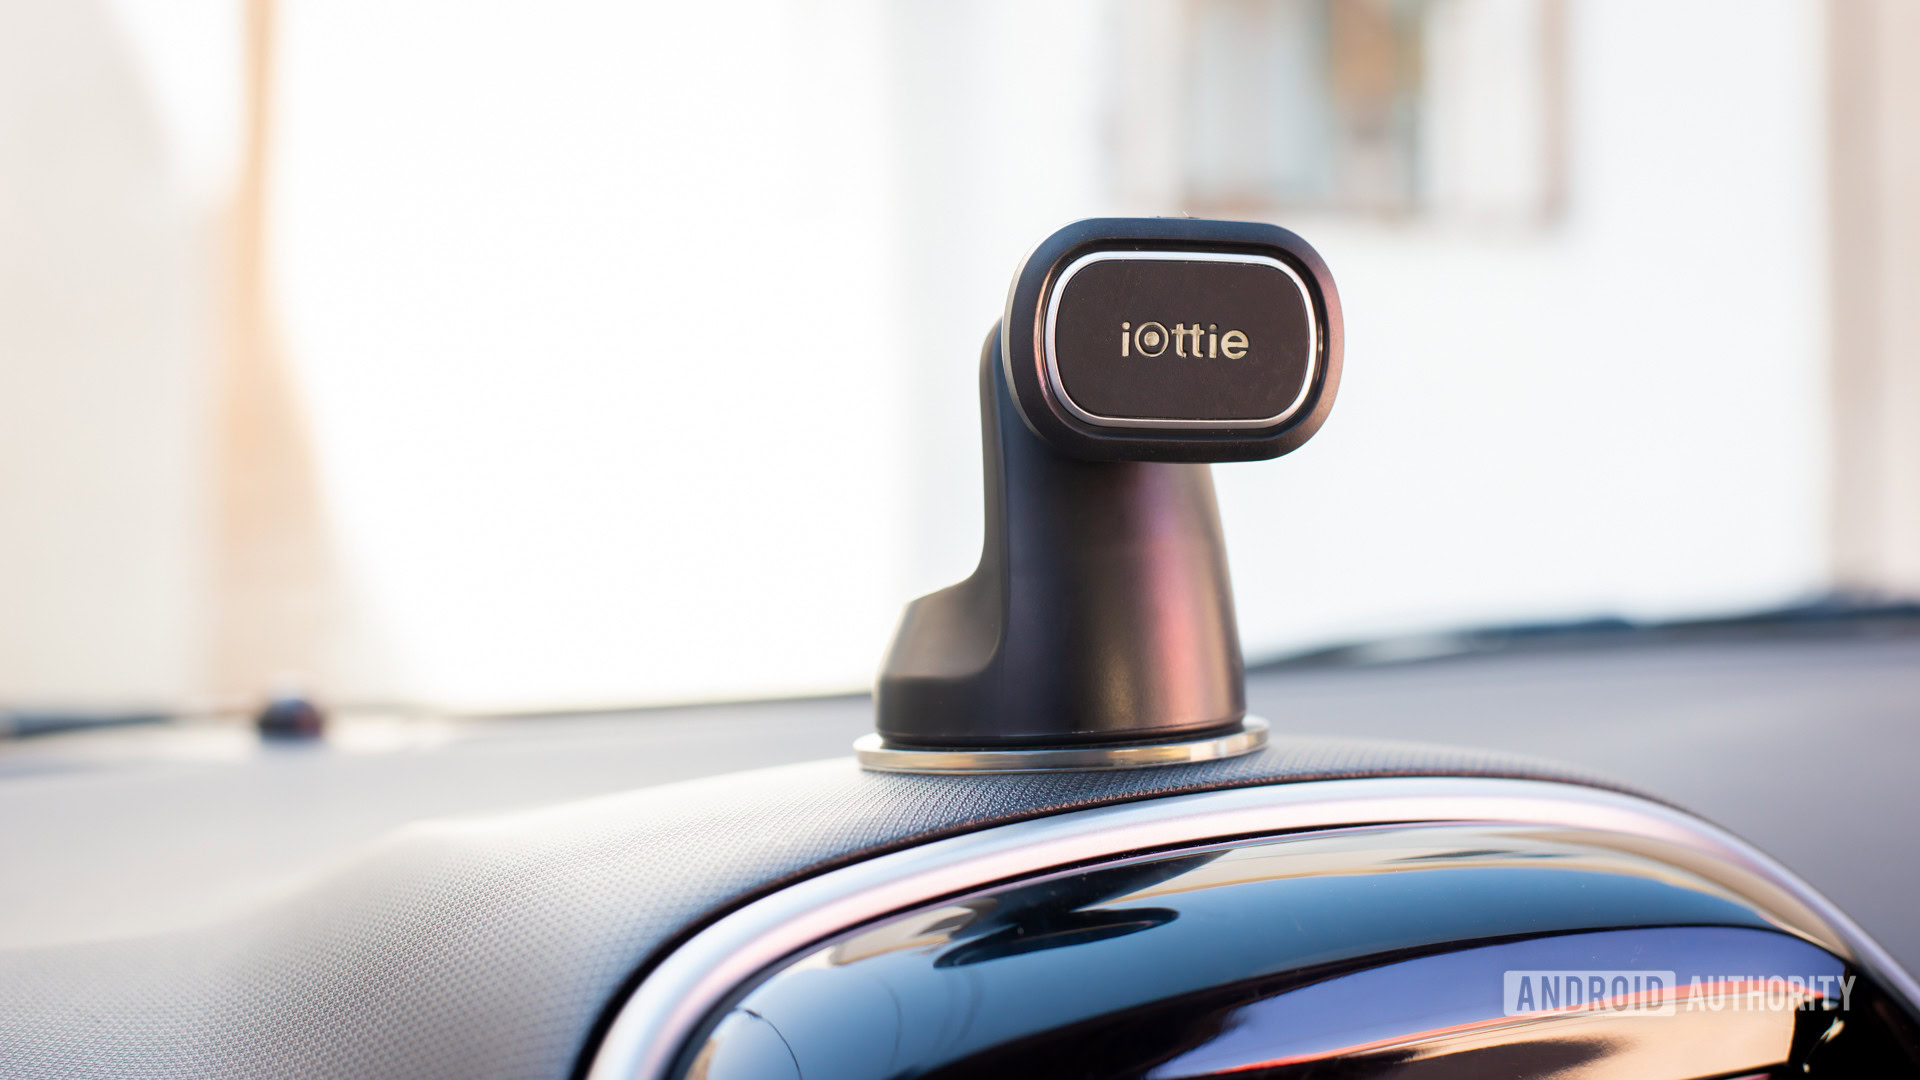 https://www.androidauthority.com/wp-content/uploads/2021/03/Iottie-iTap-Magnetic-2-car-mount-review-3.jpg